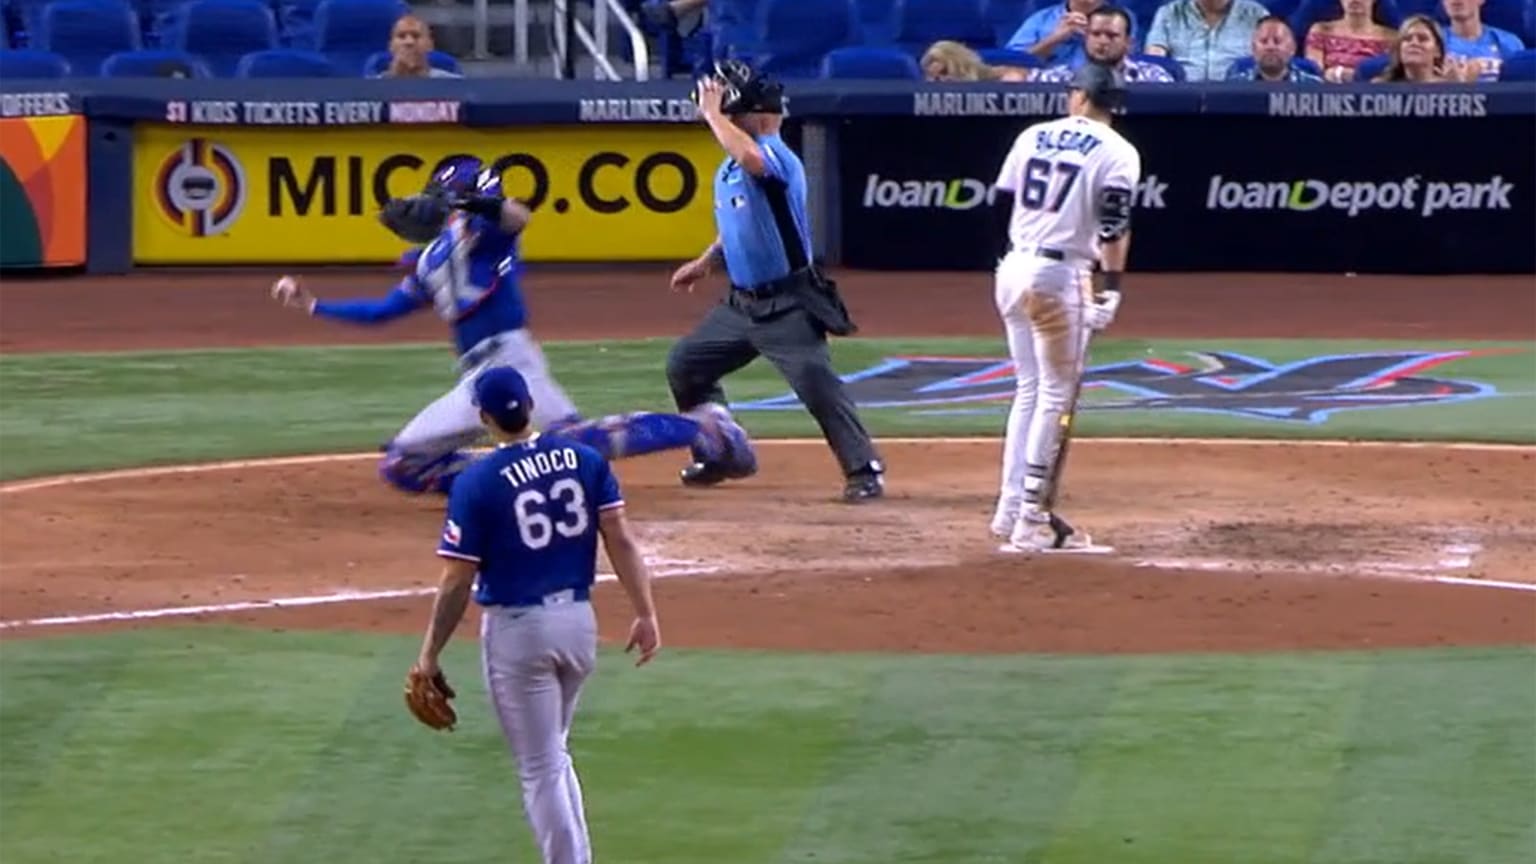 A screengrab from video of a catcher reaching out with his bare hand to catch a ball. The pitcher is in the foreground, while the umpire next to the catcher removes his mask and the batter turns to watch